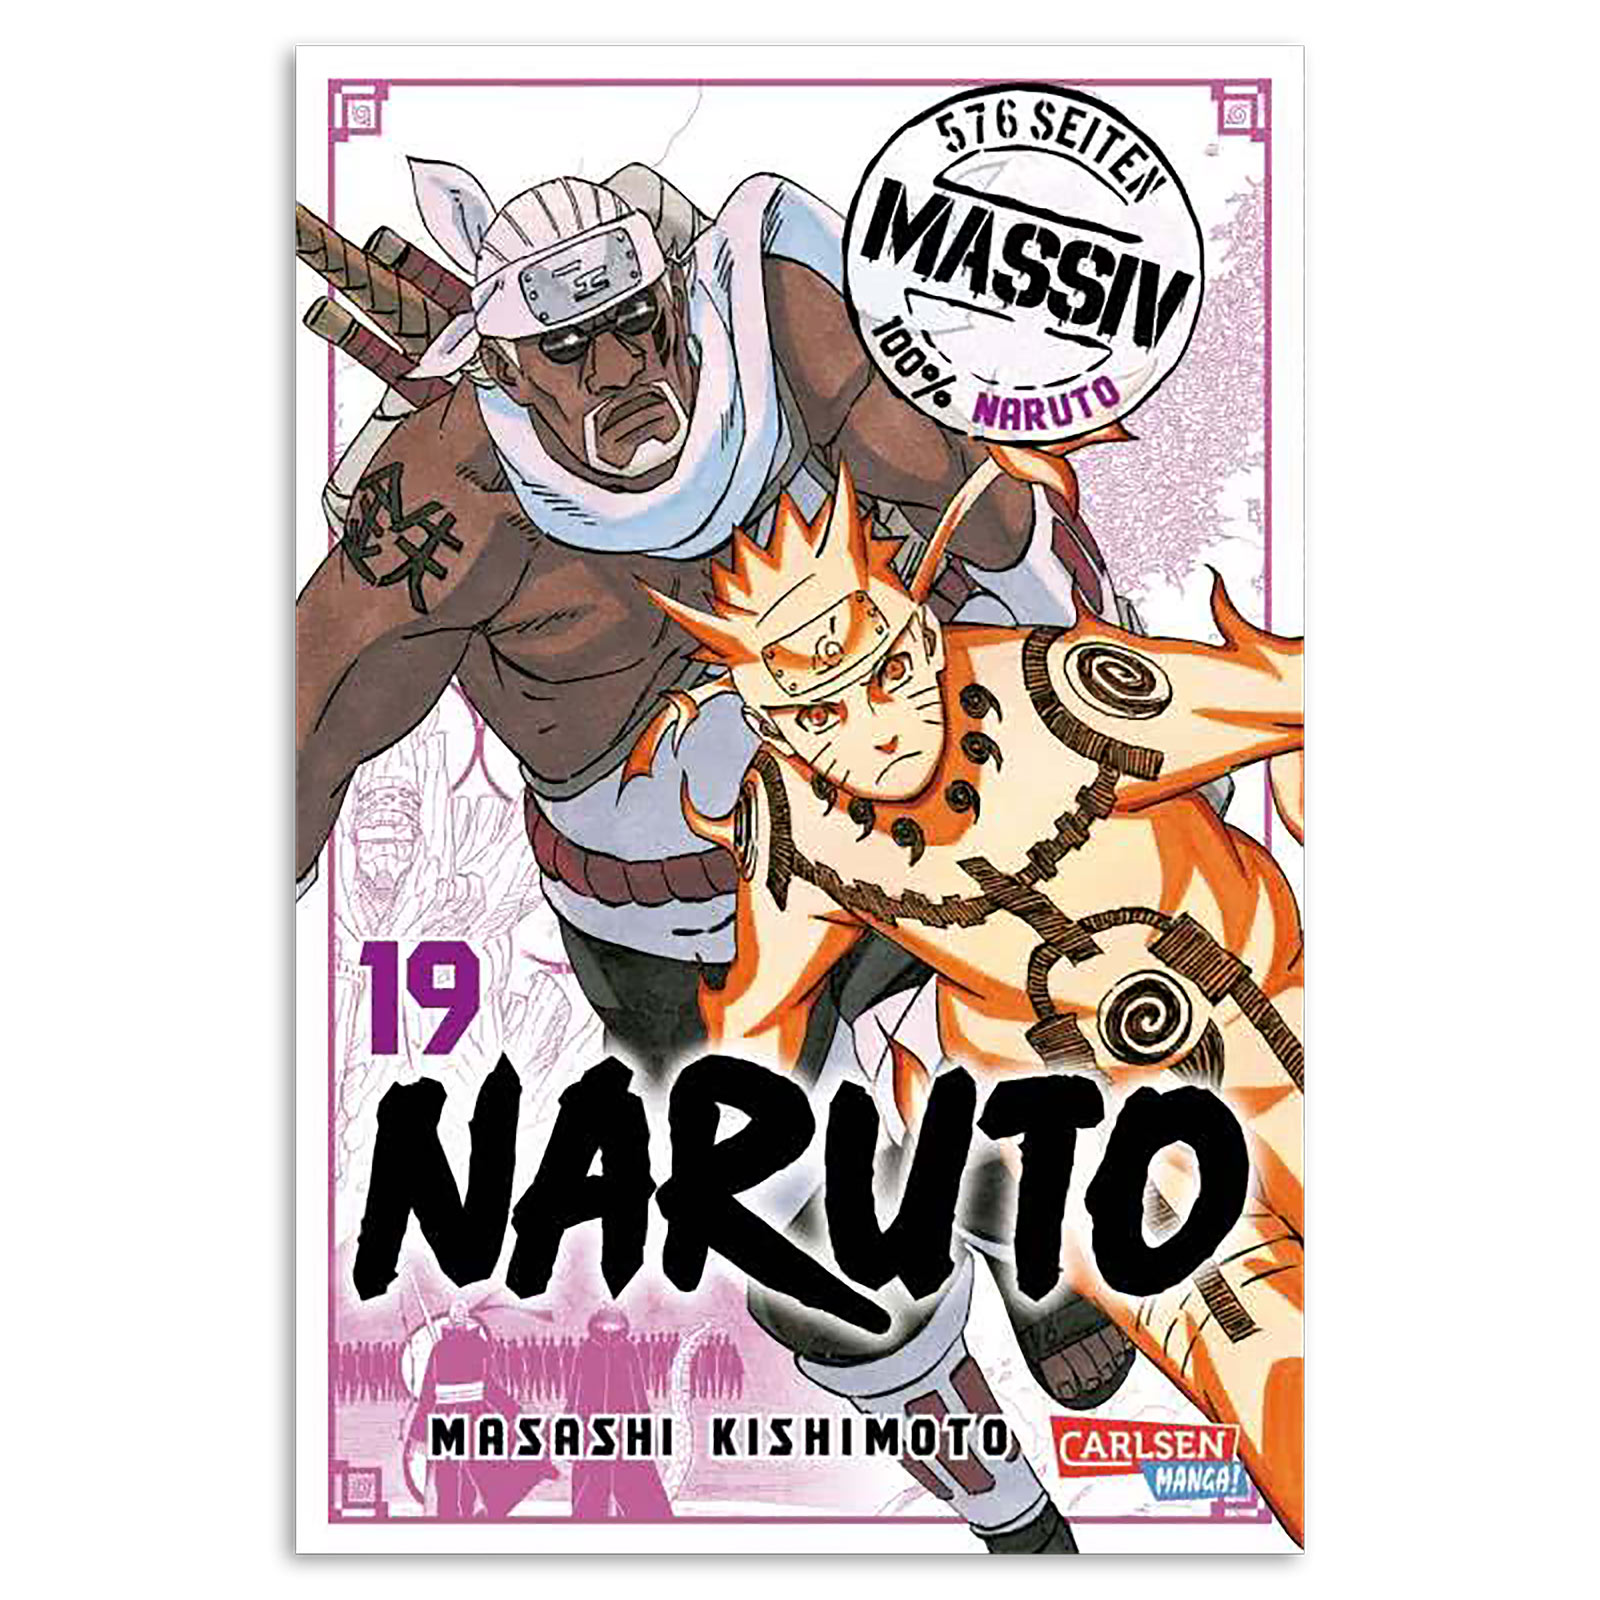 Naruto - Collected Edition 19 Paperback